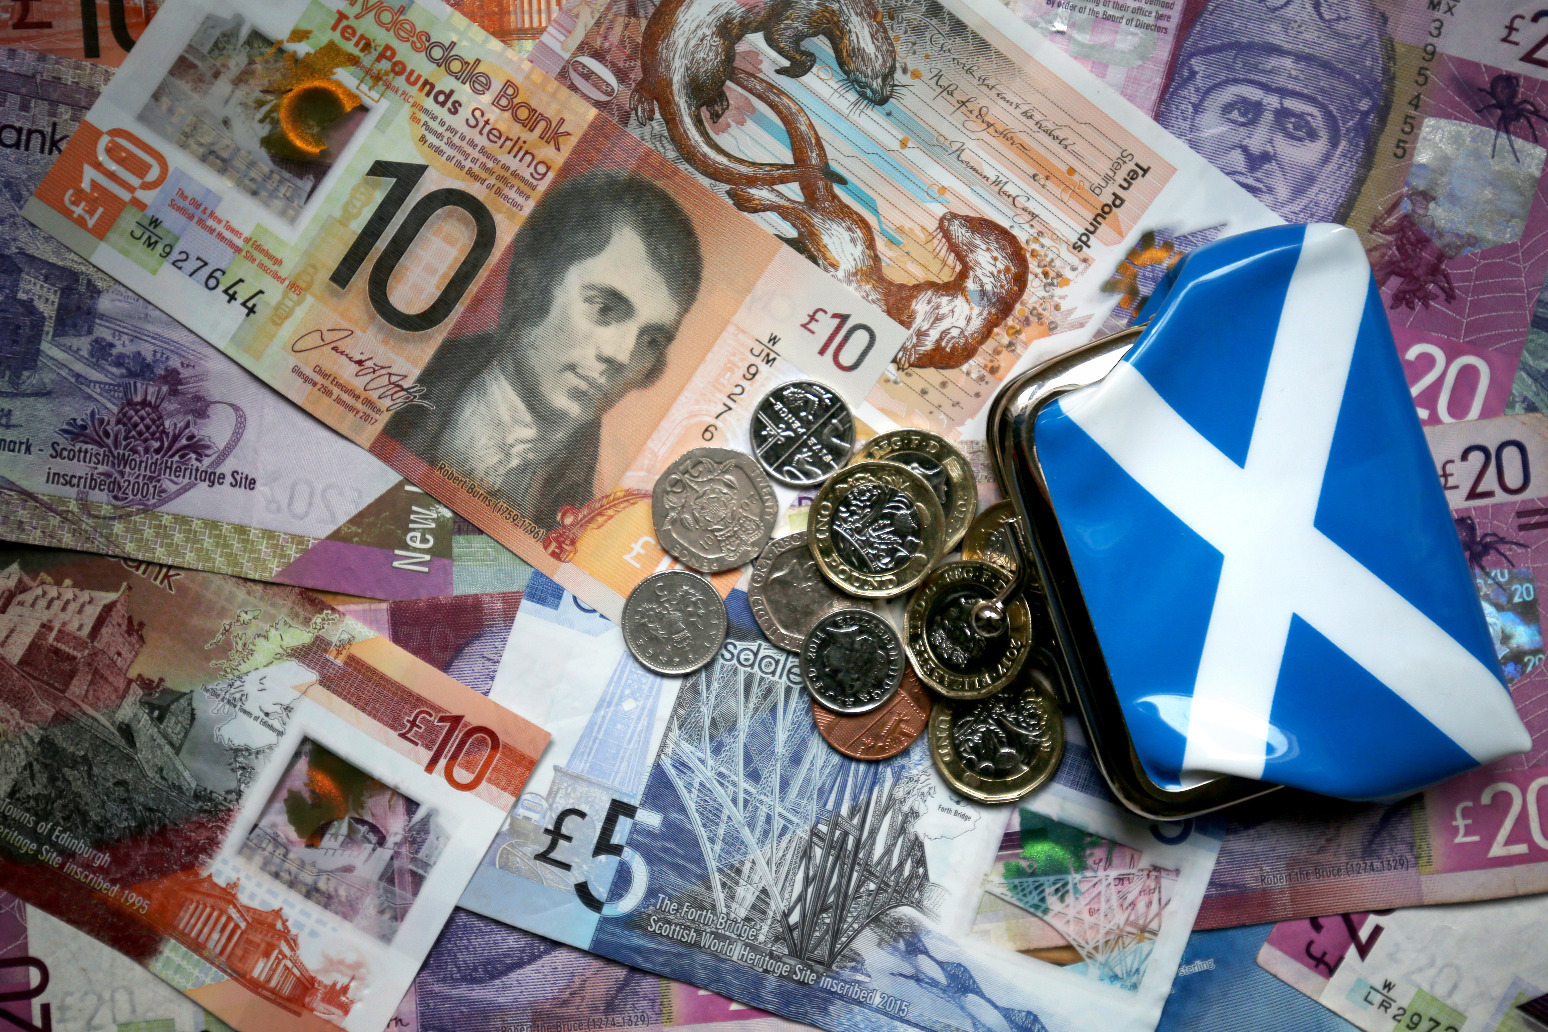 More than 600000 people in Scotland had new debt problems during pandemic